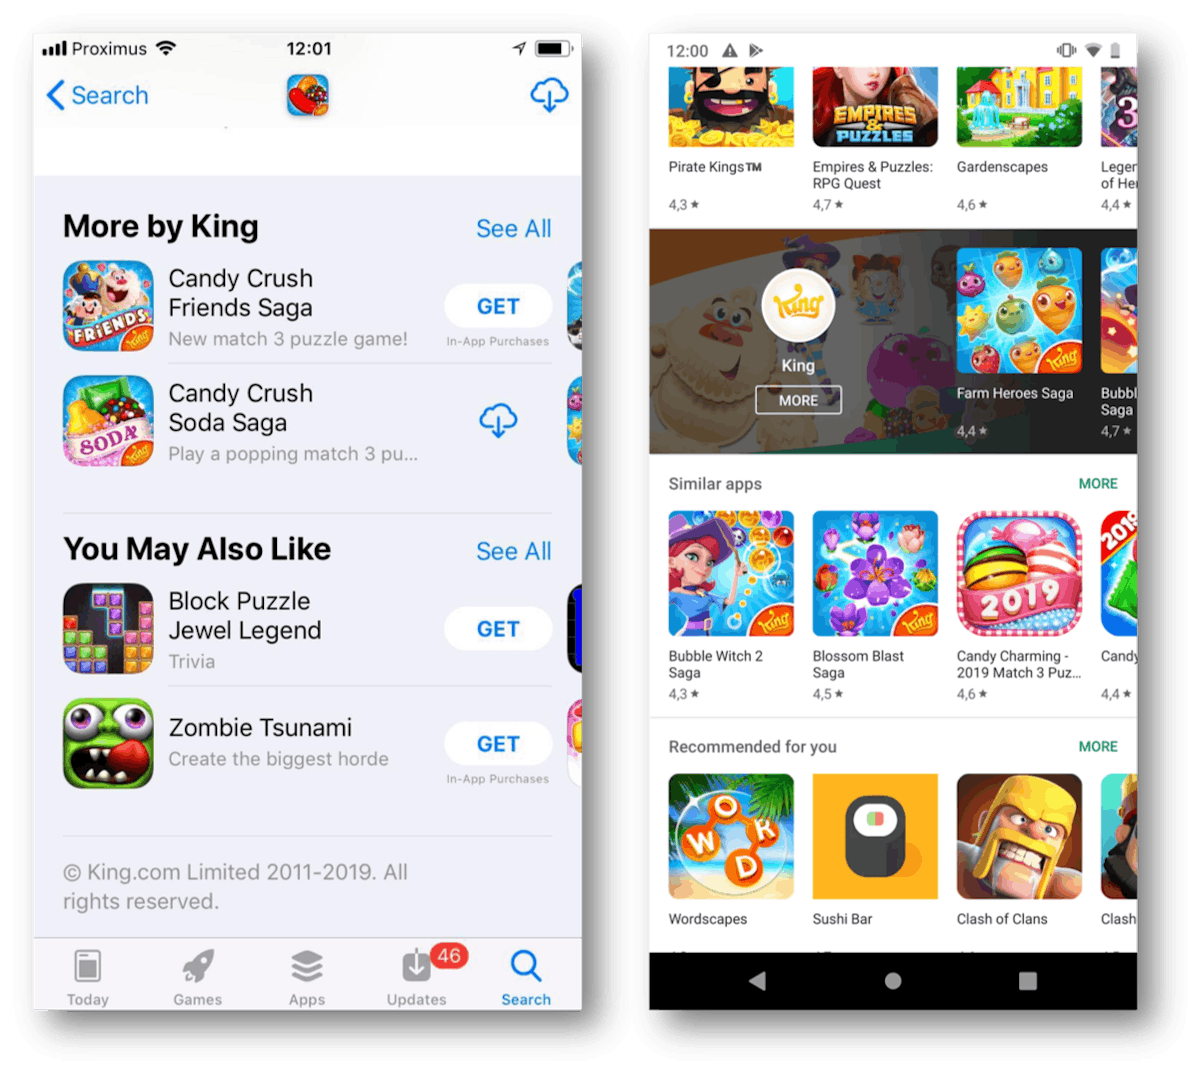 You May Also Like apps of Candy Crush Saga on the App Store vs. Similar Apps of the same app on the Play Store.